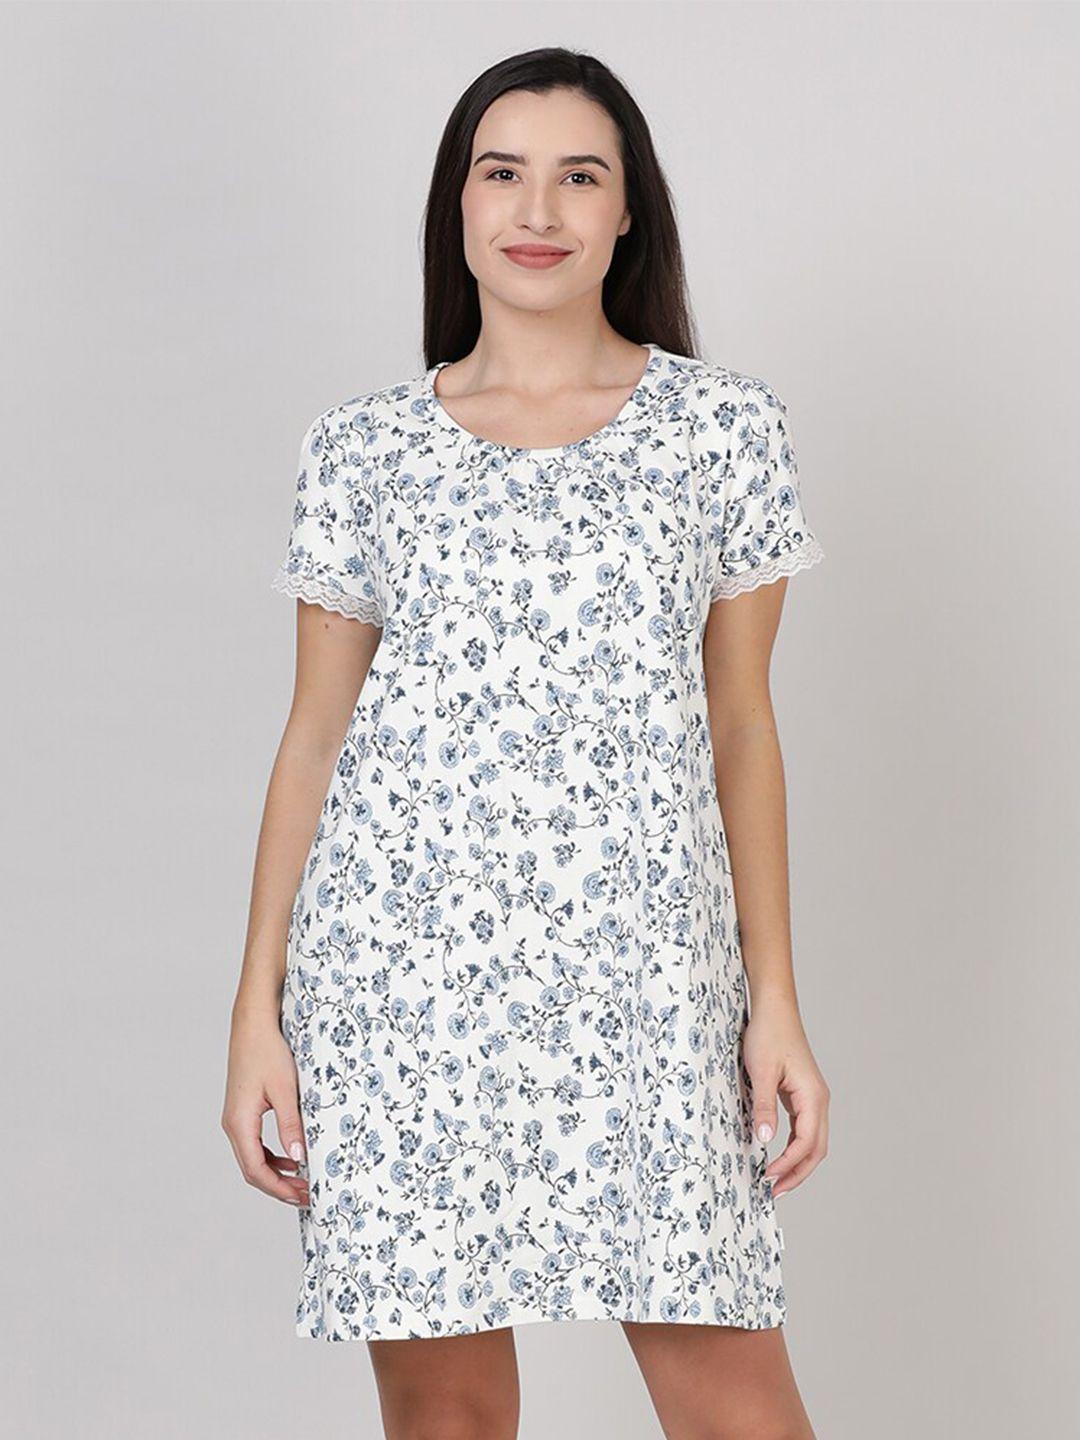 mackly white floral printed pure cotton above knee length nightdress